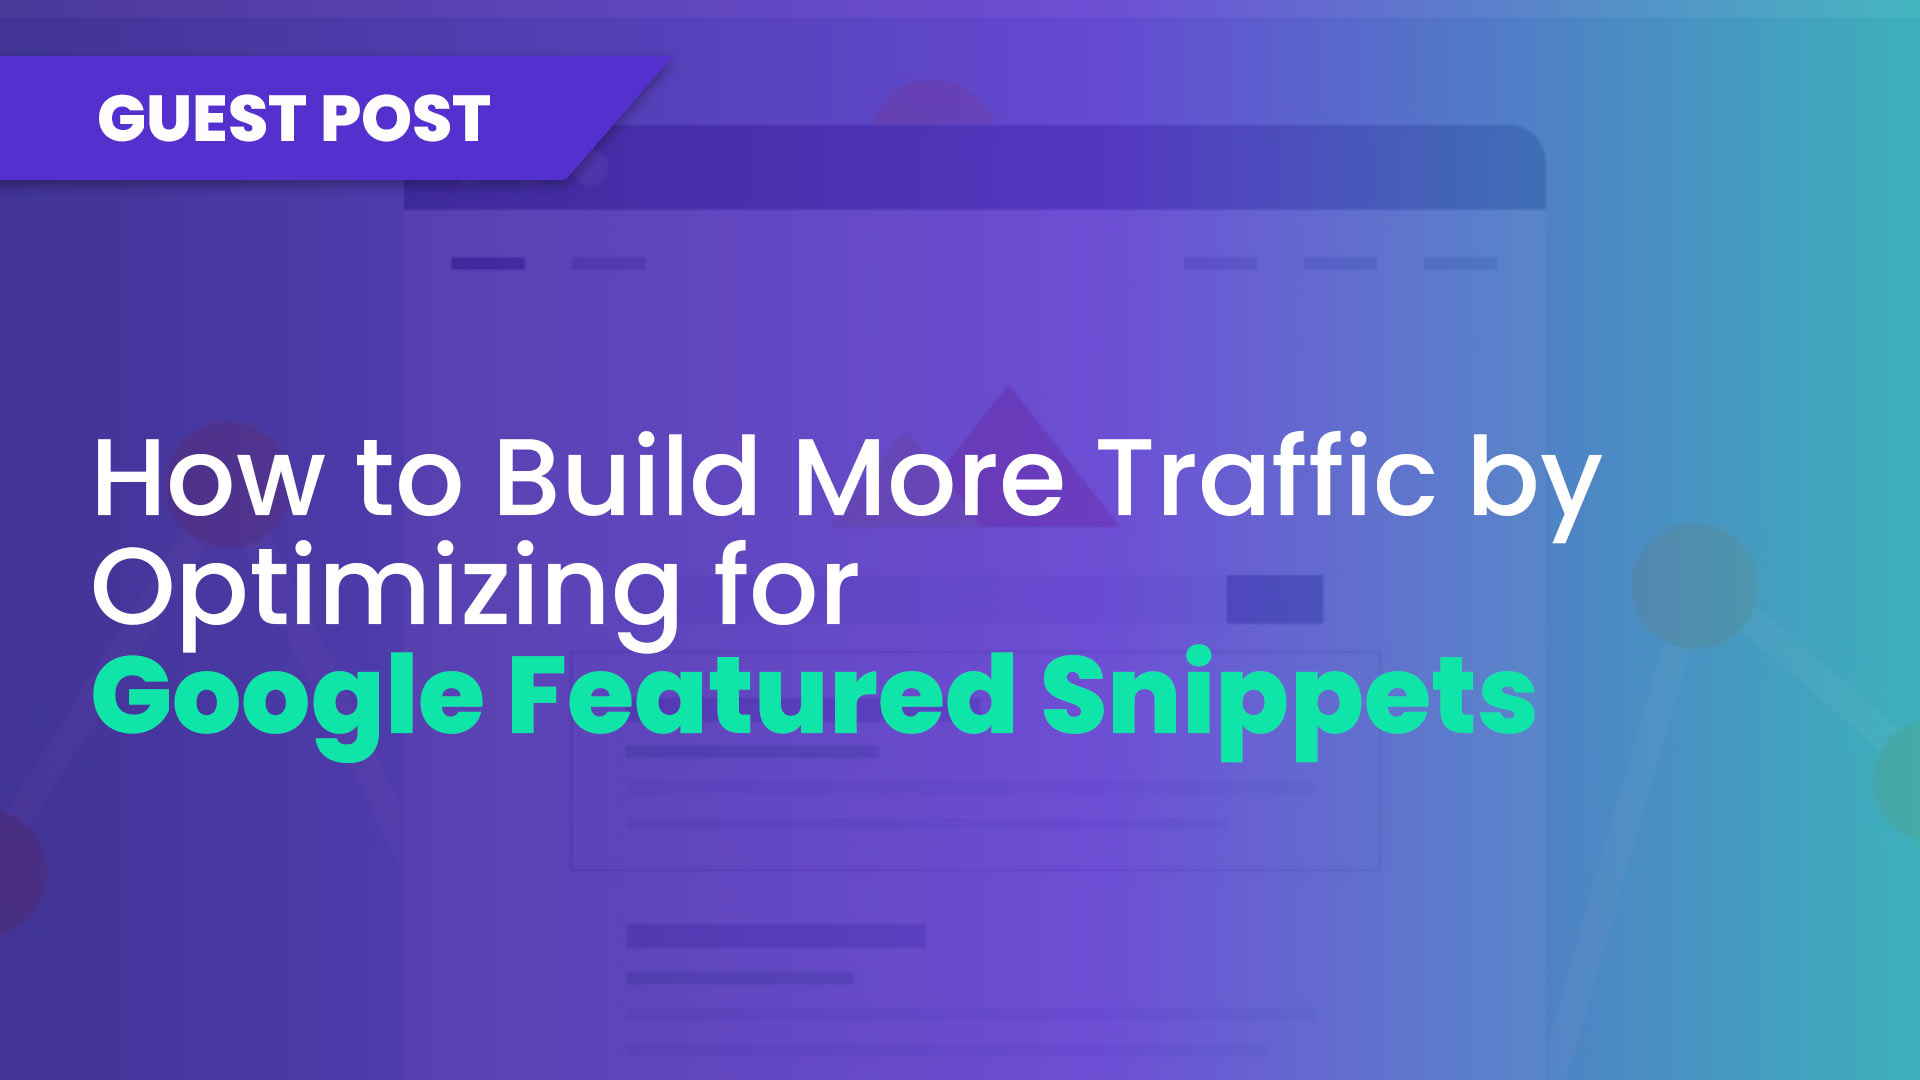 How to Build More Traffic by Optimizing for Google Featured Snippets